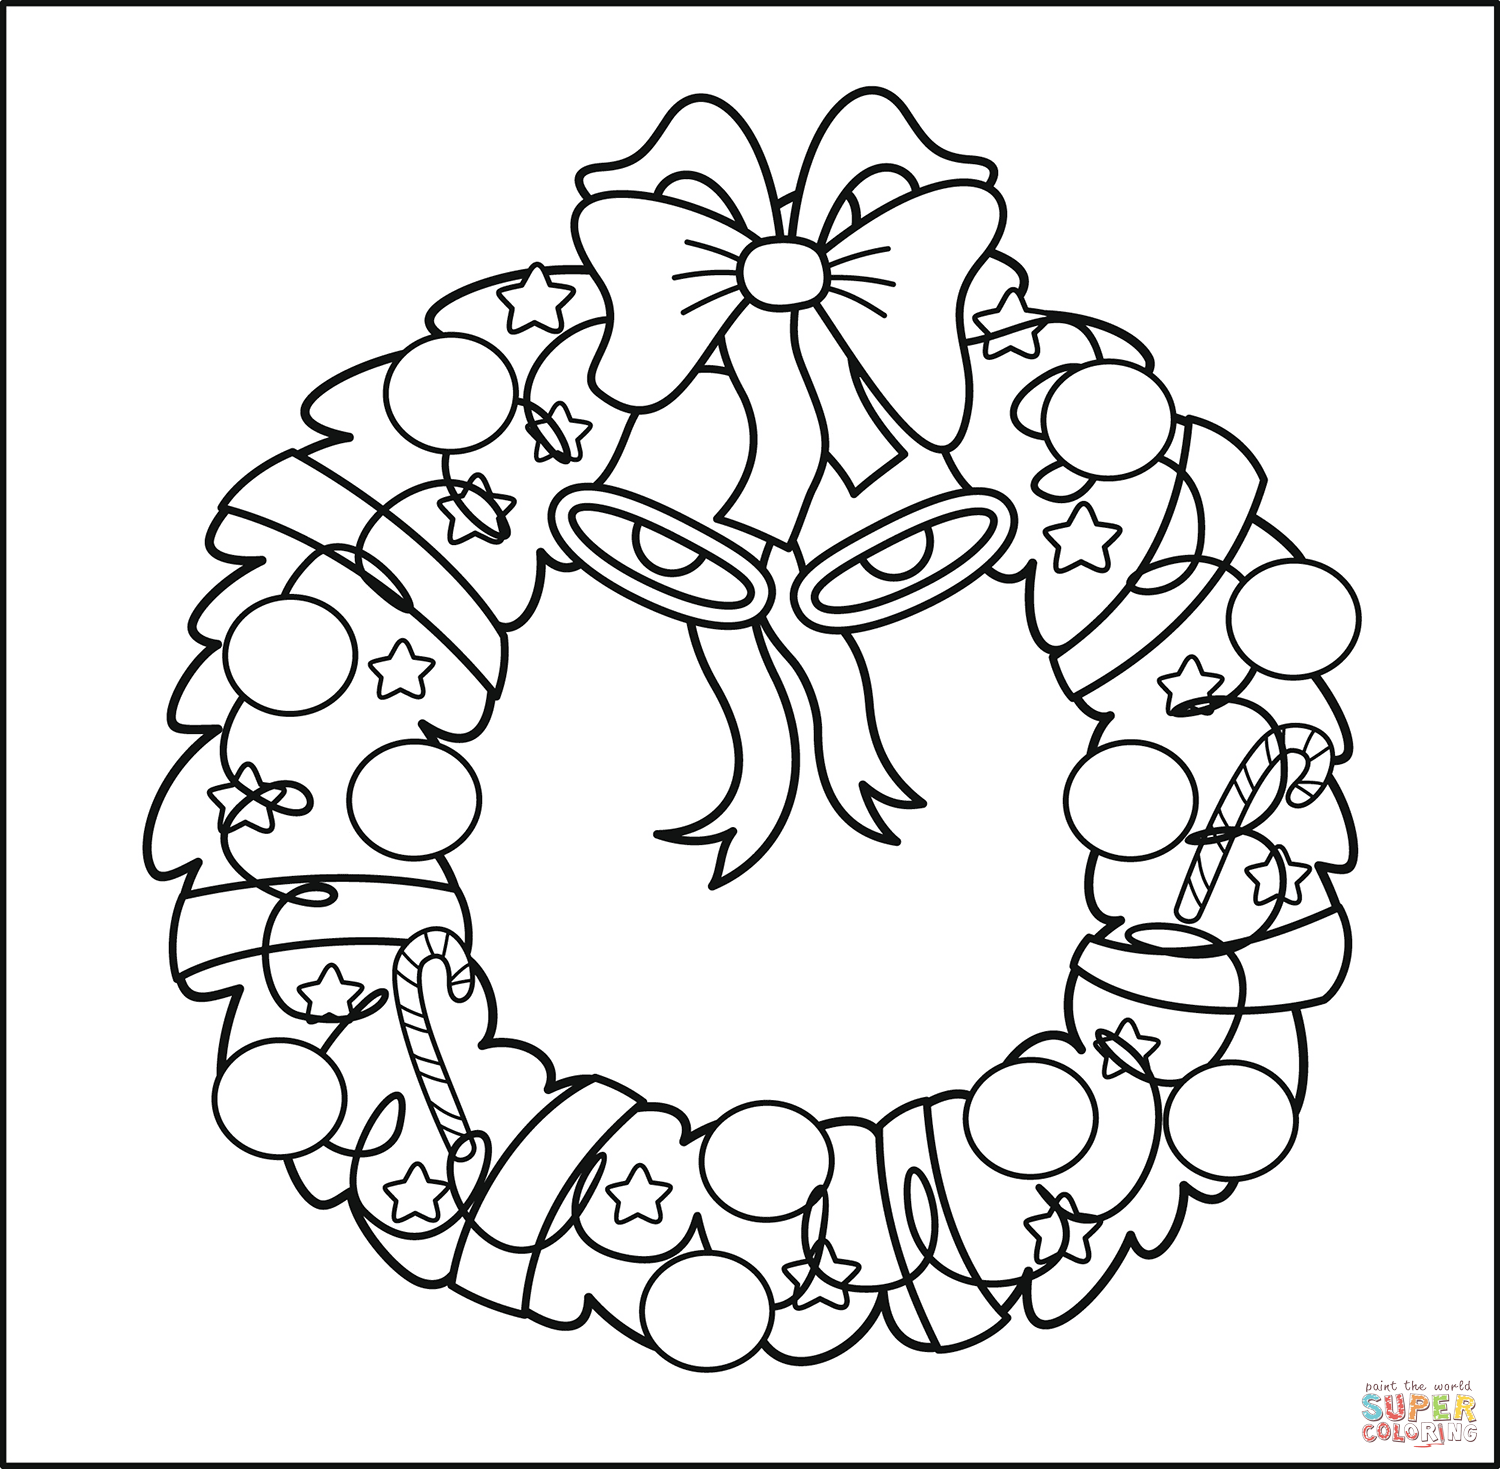 Christmas wreath coloring page free printable coloring pages